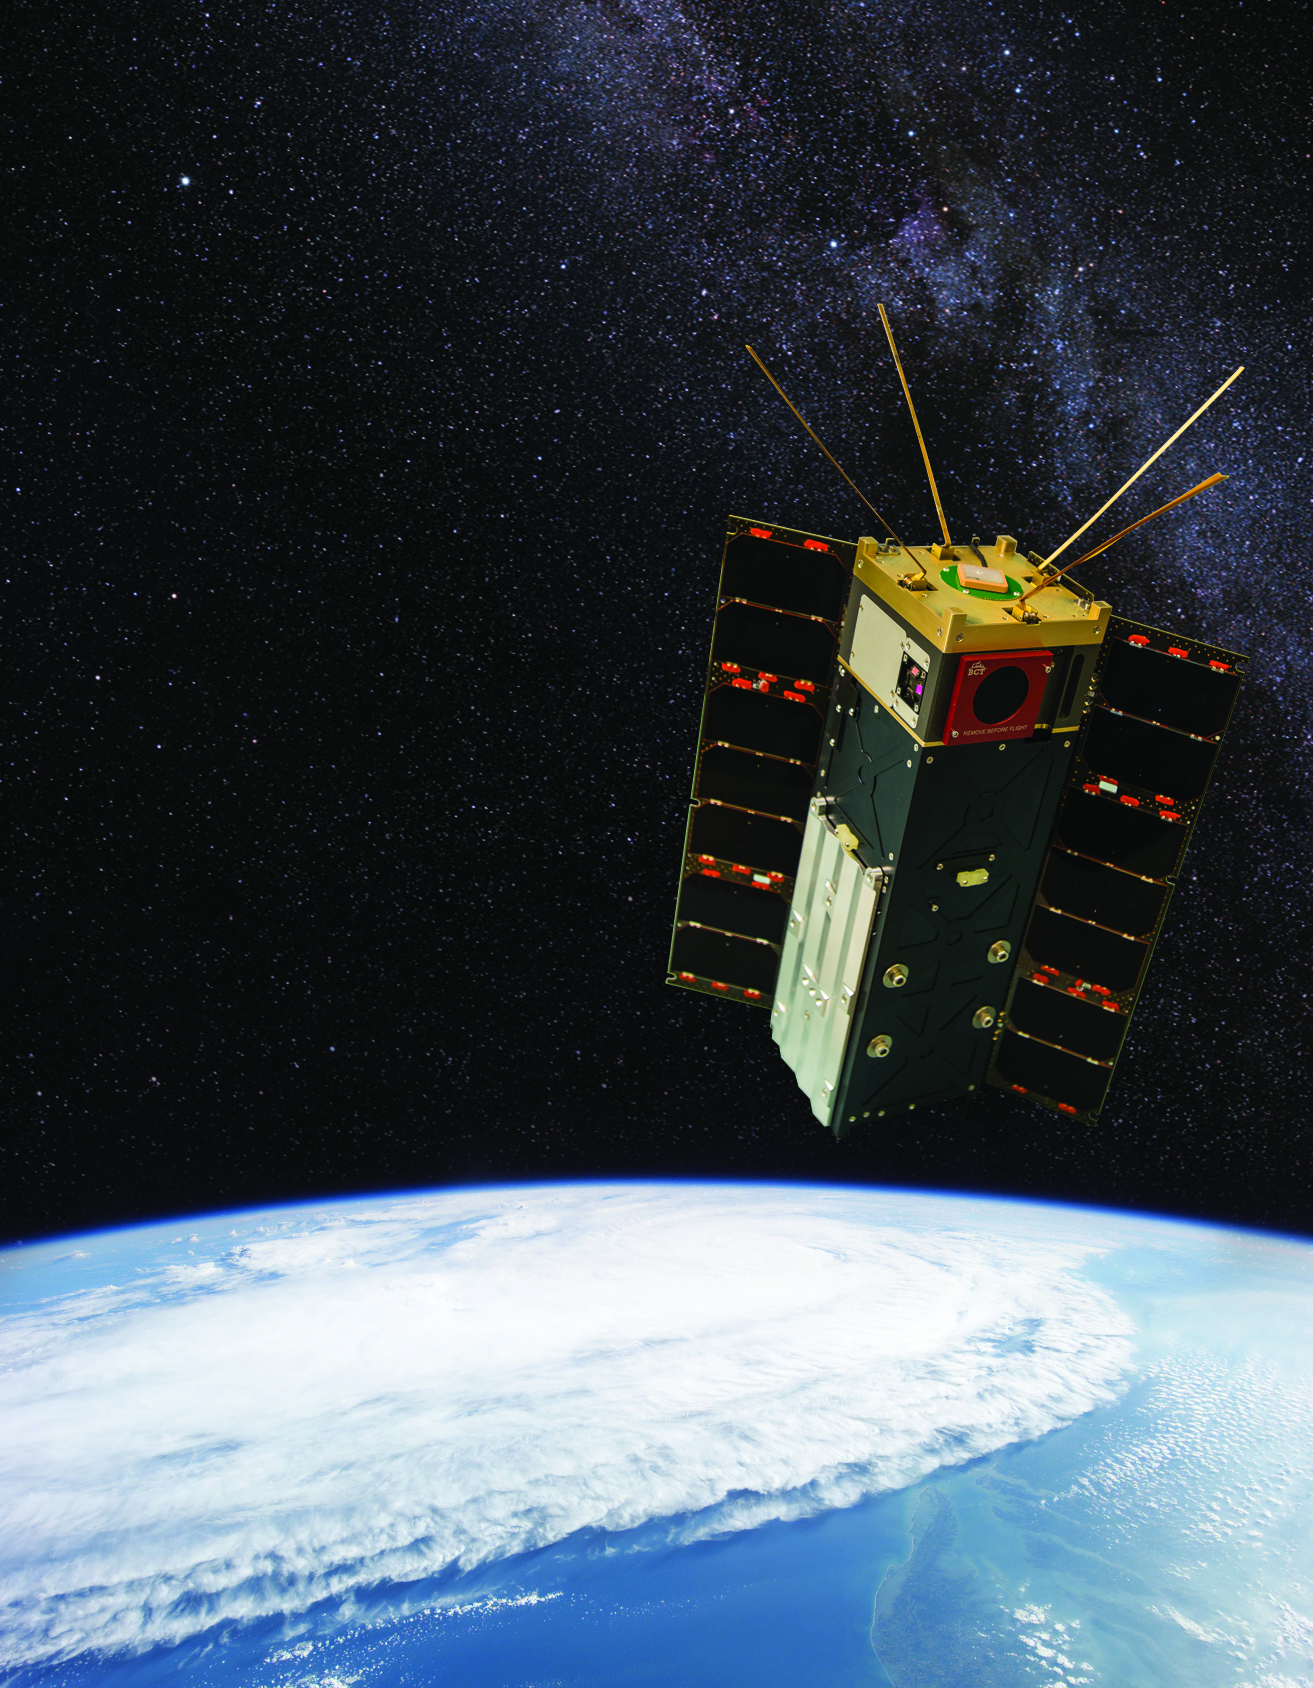 The Space Dynamics Laboratory announced today that a small satellite built by SDL was successfully deployed into orbit, and telemetry indicates that the spacecraft health is nominal and the satellite is operating as designed. Pictured is a composite illustration of the HyperAngular Rainbow Polarimeter satellite. (Credit: NASA and Space Dynamics Laboratory) 